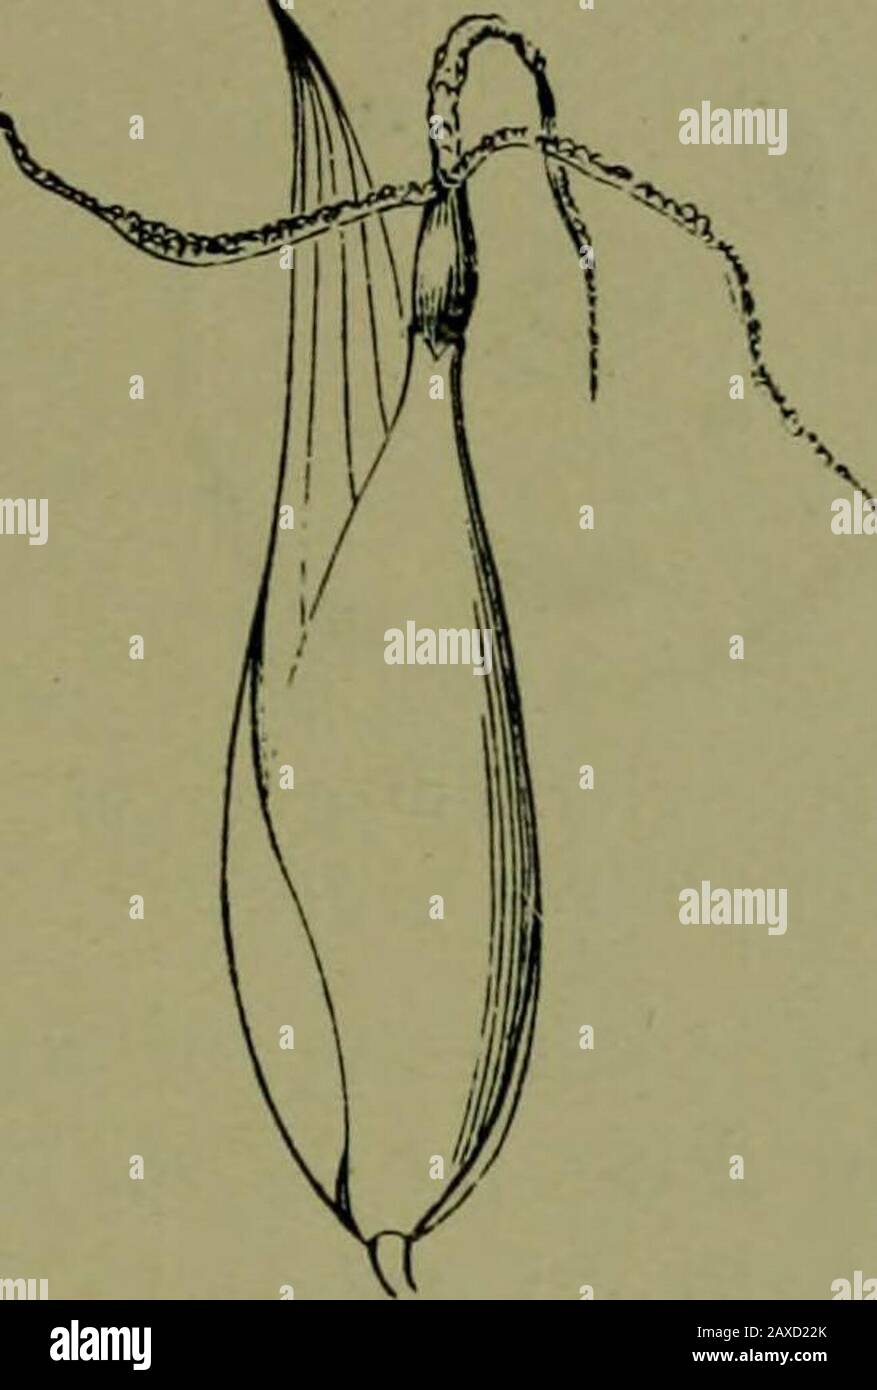 Plants and their ways in South Africa . Fig. 220.—I. Staminate flower. II. Pistillate flower of Carex. (FromThom^and Bennetts Structural and Physiological Botany.) Carex.—Glumes overlapping, placed all around the stem.The flowers are usually imperfect. Order Graminace^e, the Grass Family. Stem cylindrical or compressed (not 3-angled), hollow (notin Indian corn or sugar cane), with solid nodes. Leaves 2-ranked, sheath split, ligule present. Flowers in the axils ofglumes; perianth of two minute lodicules; stamens 3 (some-times 6); anthers versatile. Fruit an achene (caryopsis). The number of gen Stock Photo